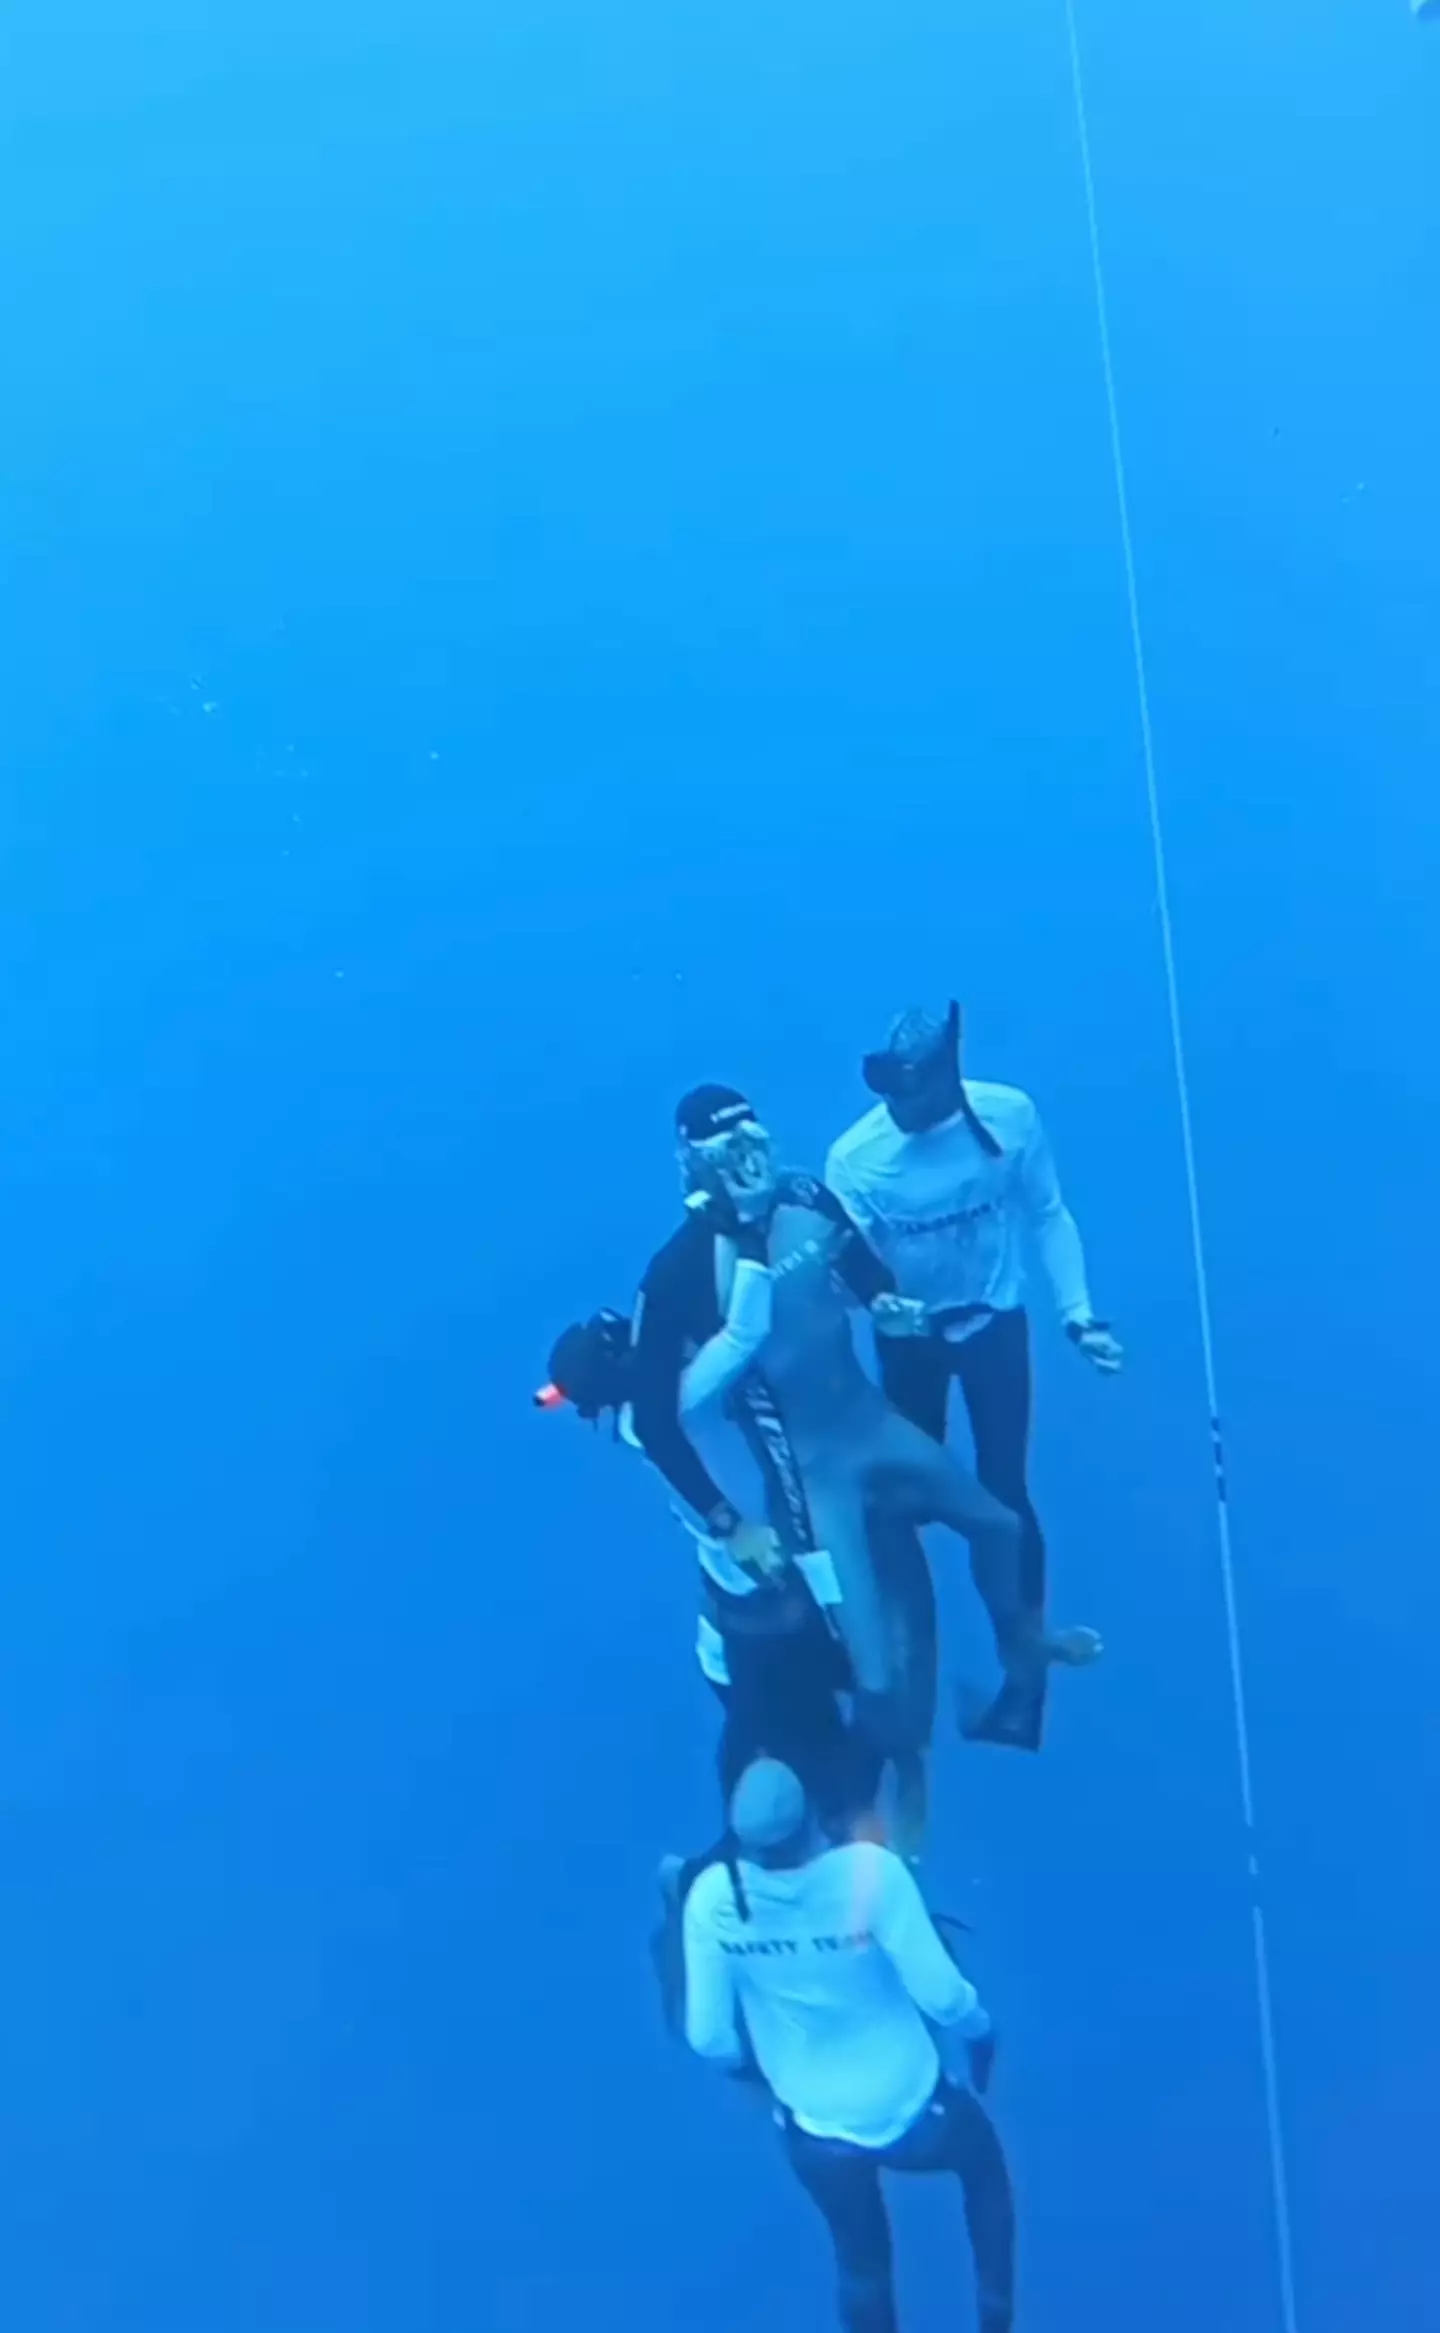 A blacked-out diver being rescued from a seriously dangerous situation.